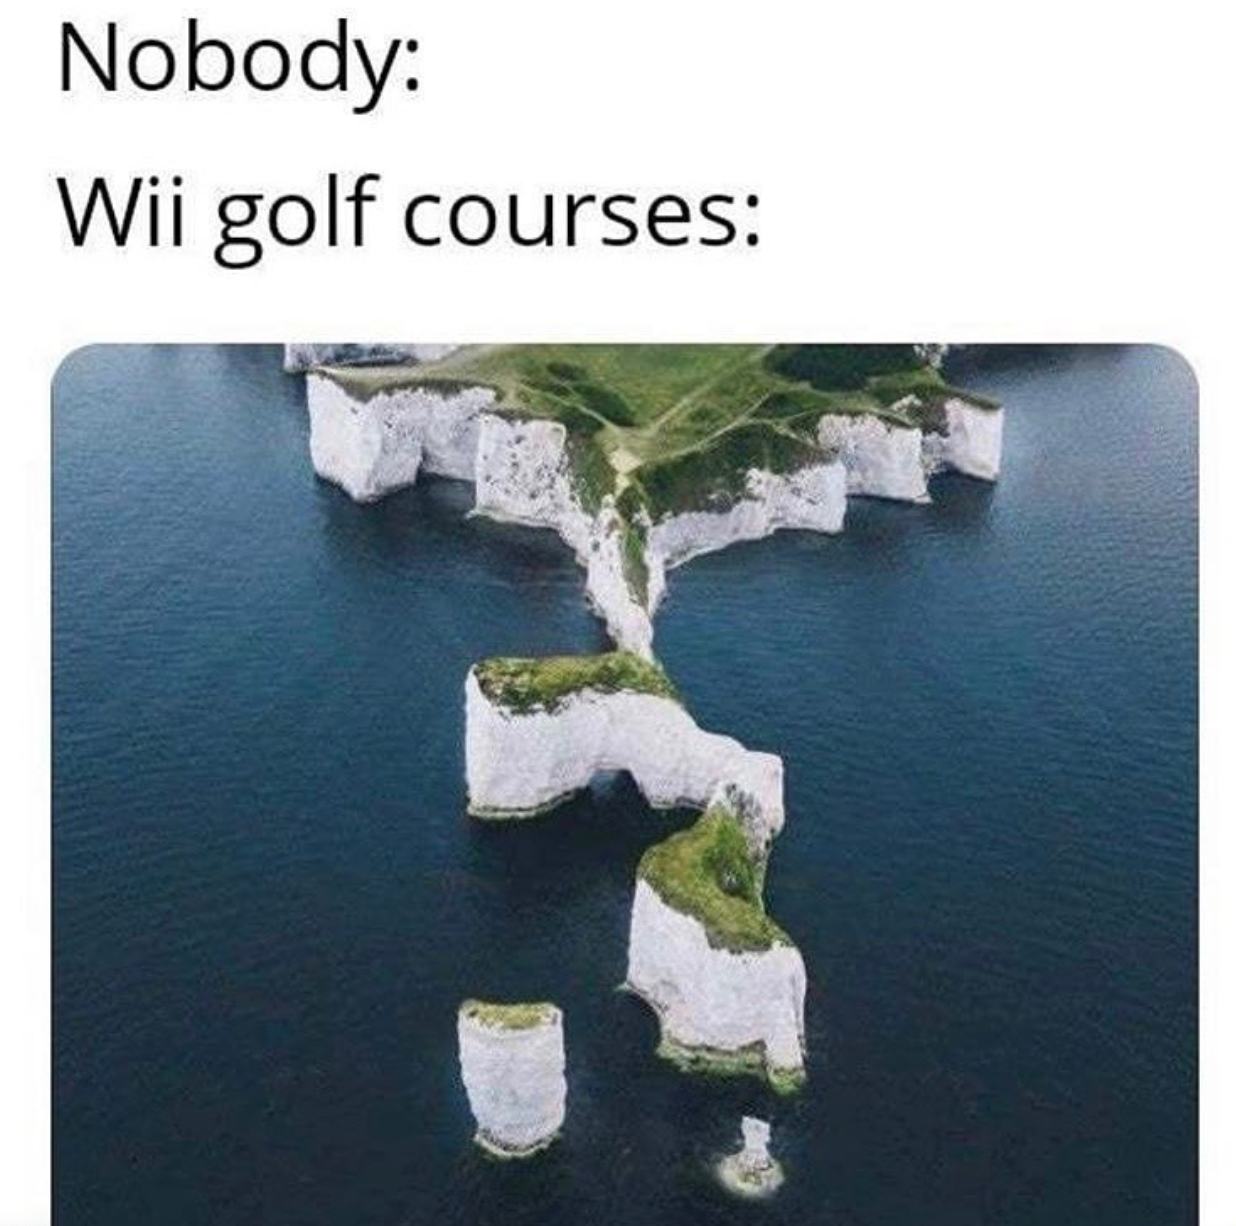 funny gaming memes - white cliffs of dover england - Nobody Wii golf courses